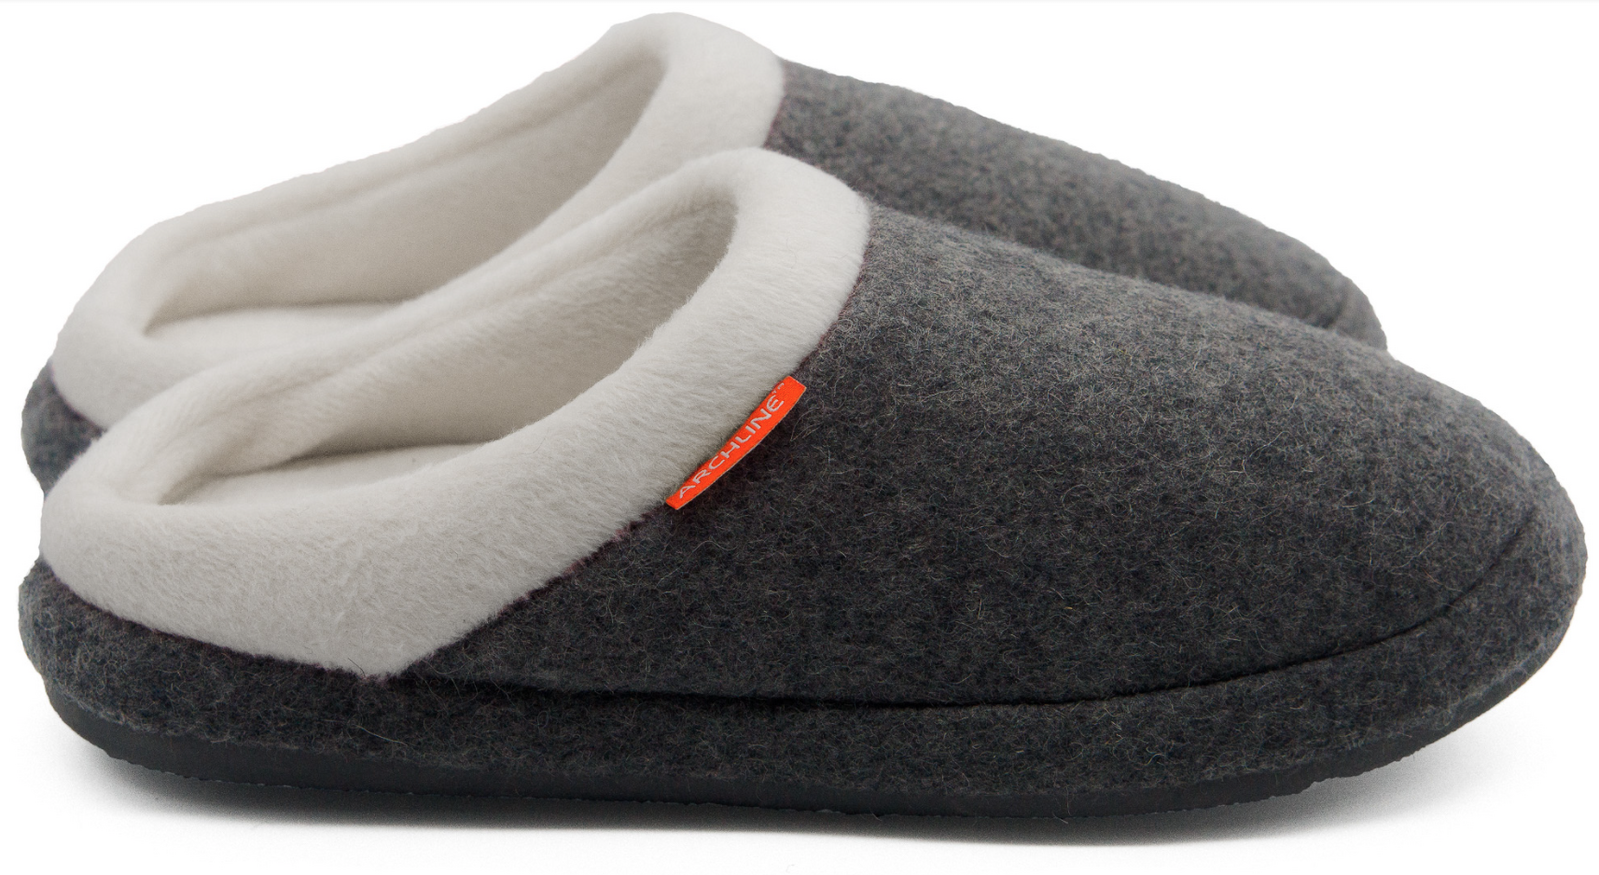 Orthotic Slippers Slip On Arch Scuffs Orthopedic Moccasins - Grey Marle - EUR 39